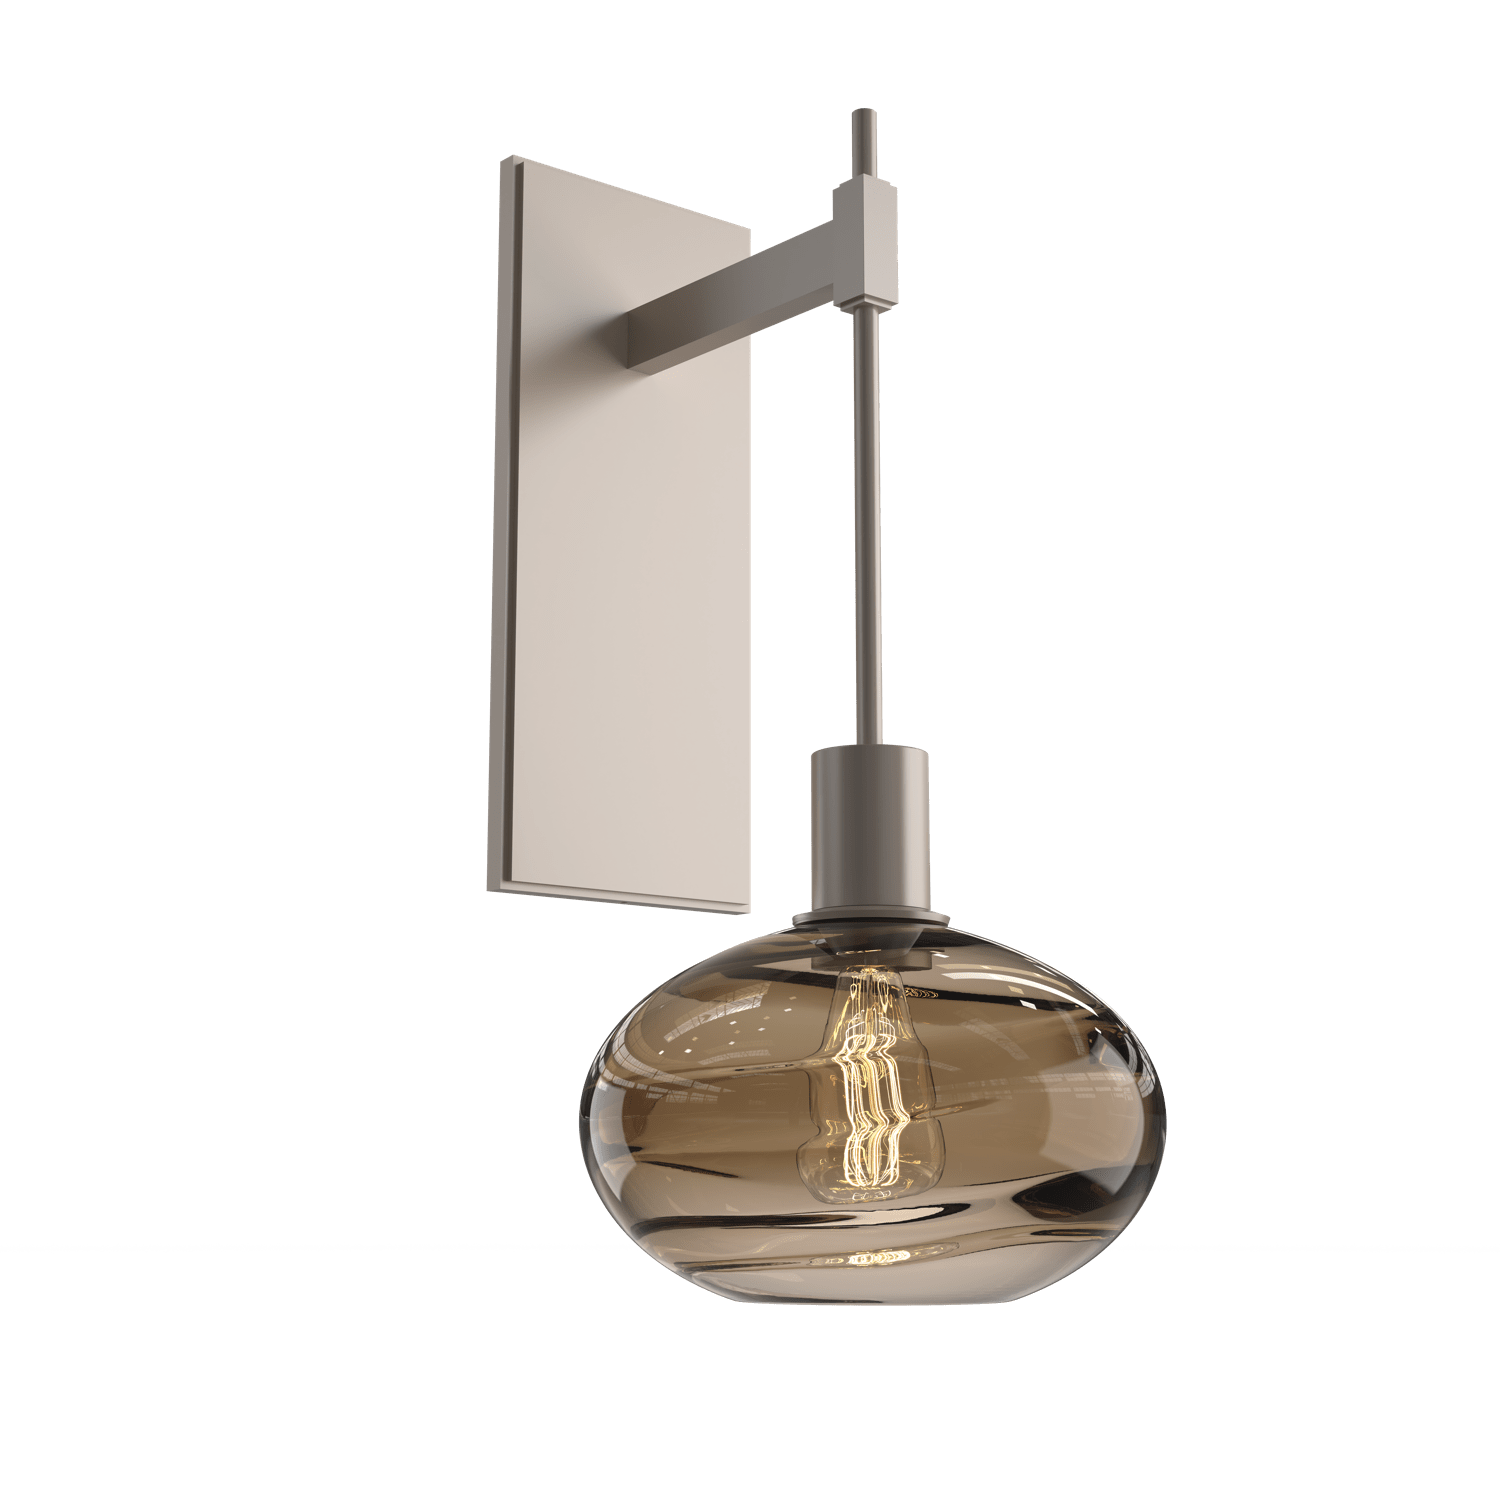 IDB0036-18-BS-OB-Hammerton-Studio-Optic-Blown-Glass-Coppa-tempo-wall-sconce-with-metallic-beige-silver-finish-and-optic-bronze-blown-glass-shades-and-incandescent-lamping